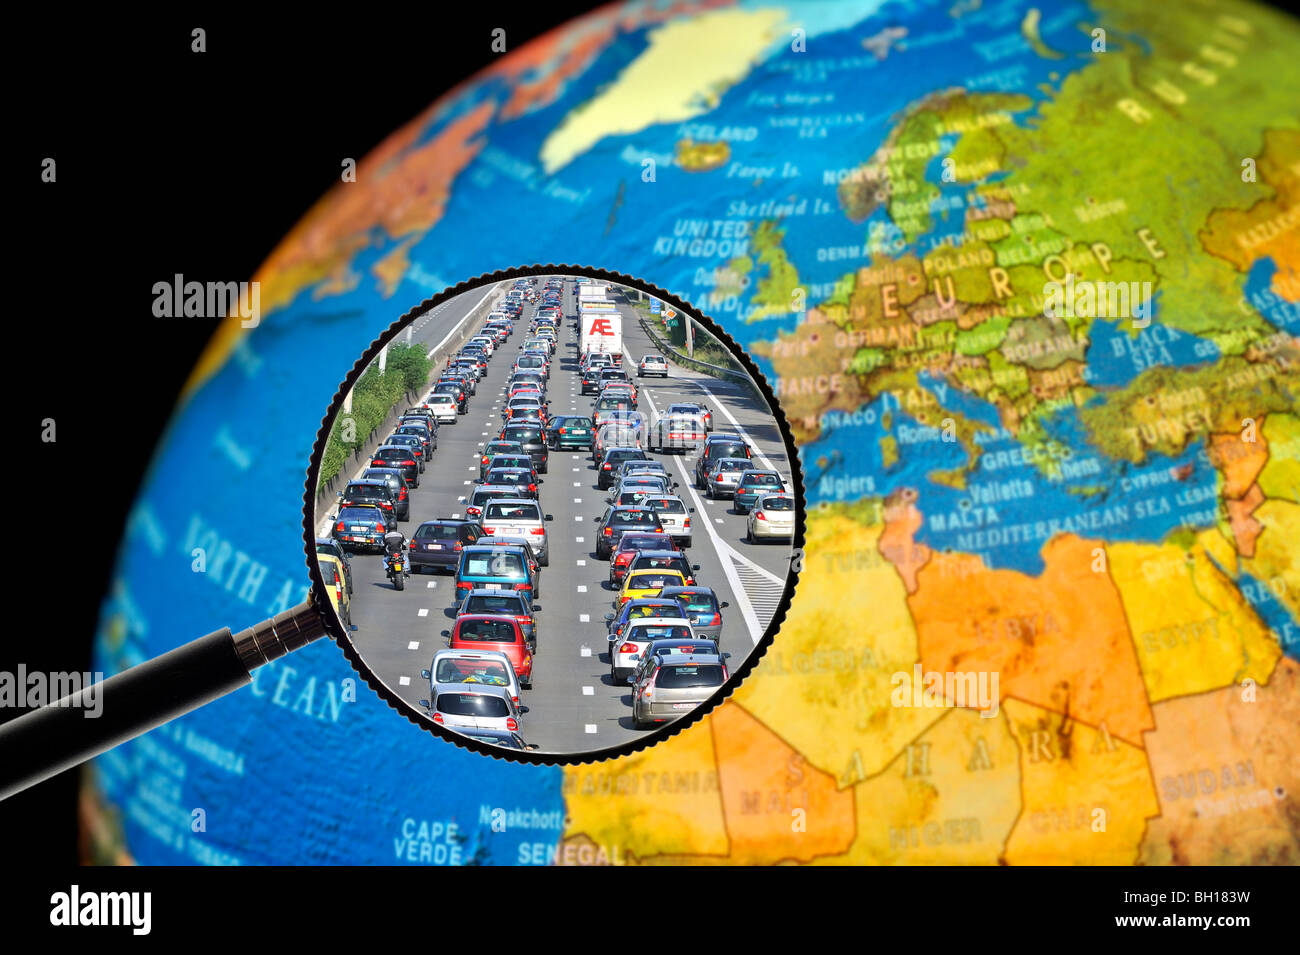 Cars in traffic jam on motorway during summer holidays seen through magnifying glass held against illuminated terrestrial globe Stock Photo